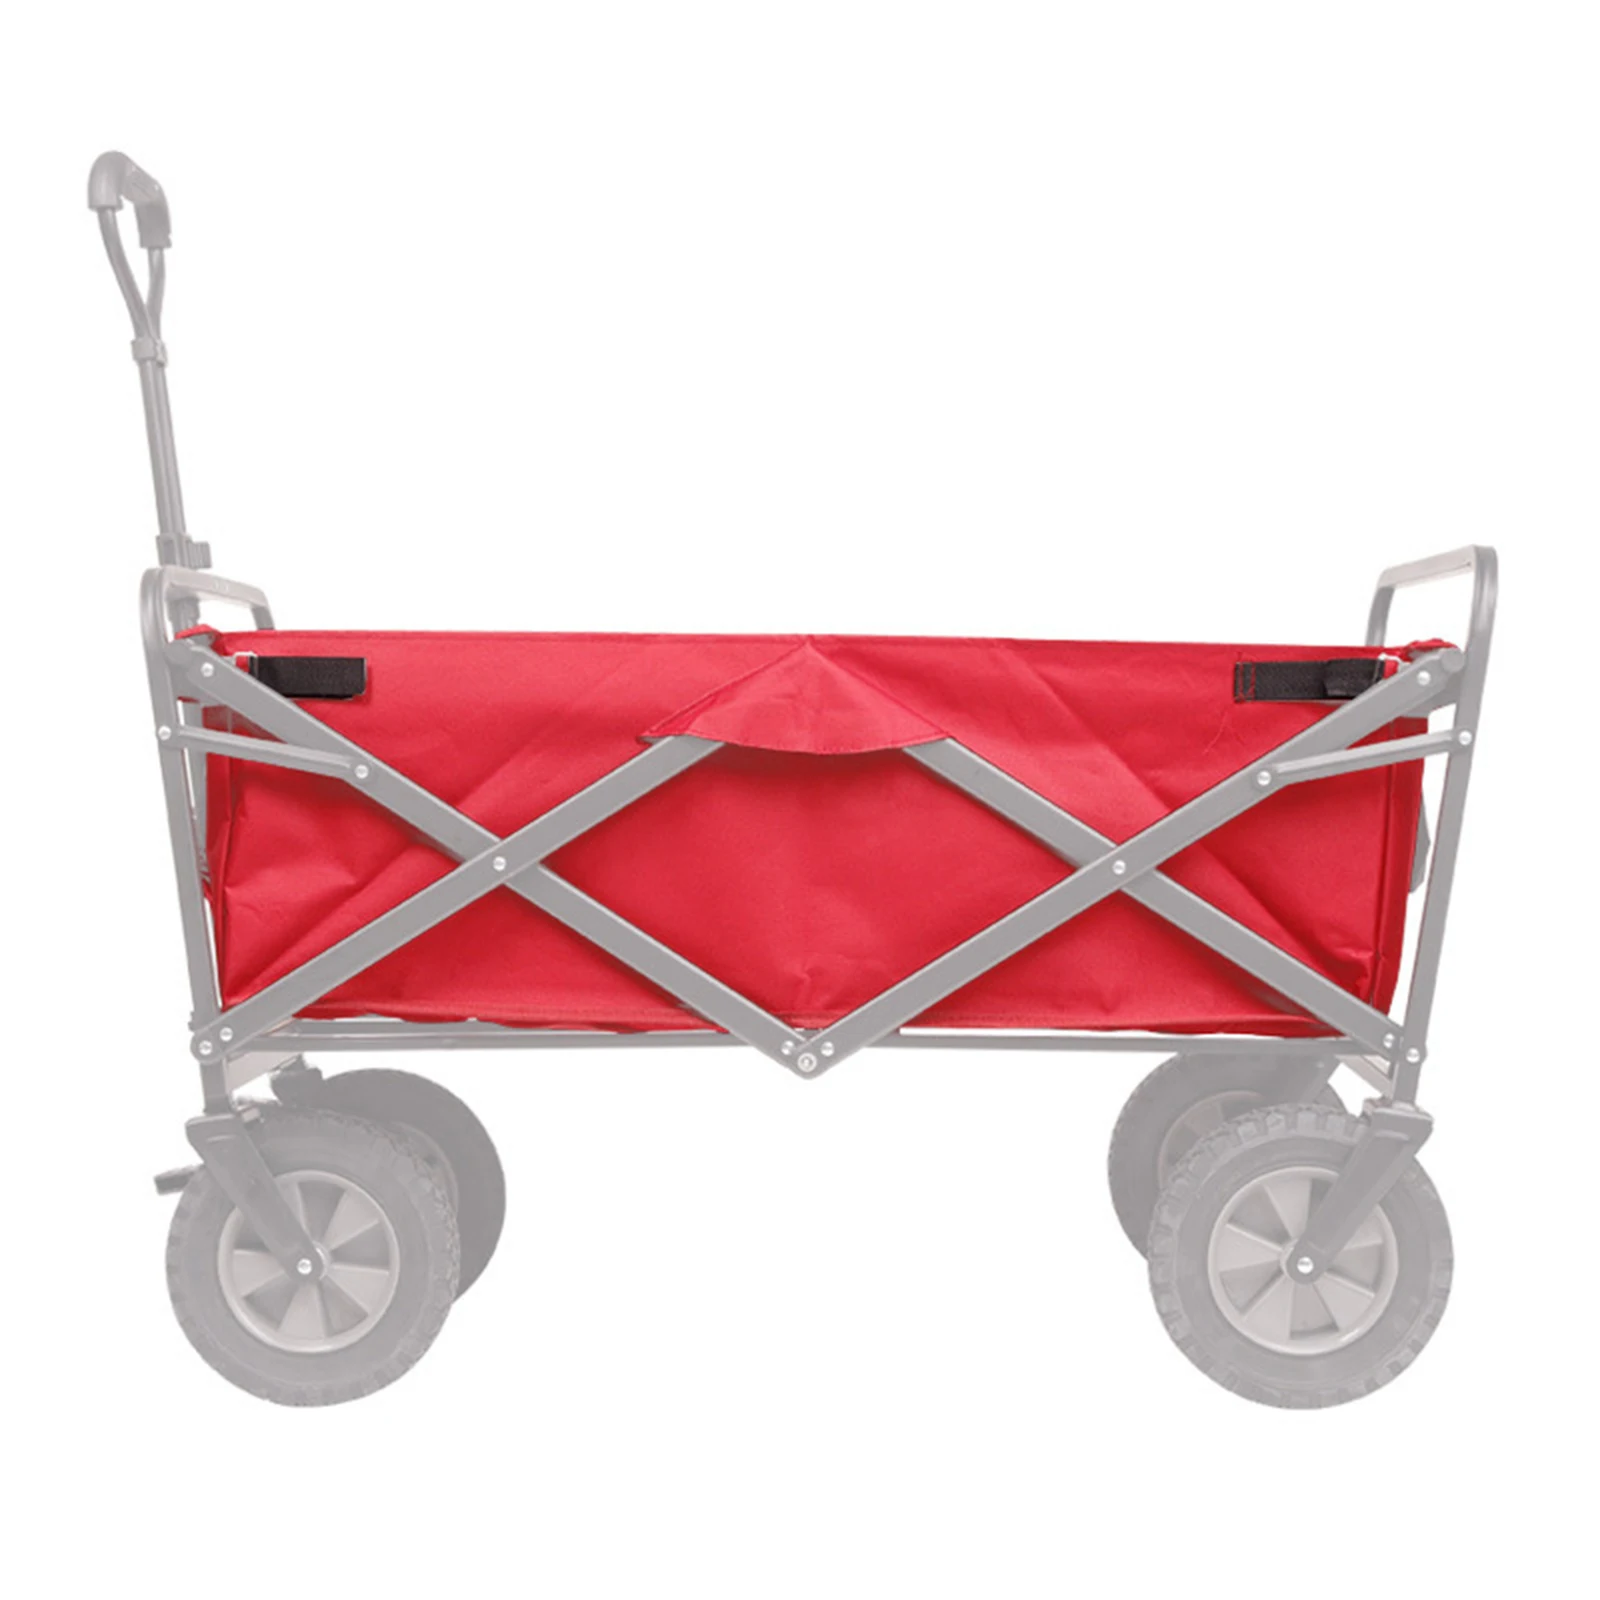 

Brand New Cloth Bag Trolley Cart 600D Oxford Cloth 85 * 43 * 26cm Folding Wagon Lining For Camping Liner Bag Case